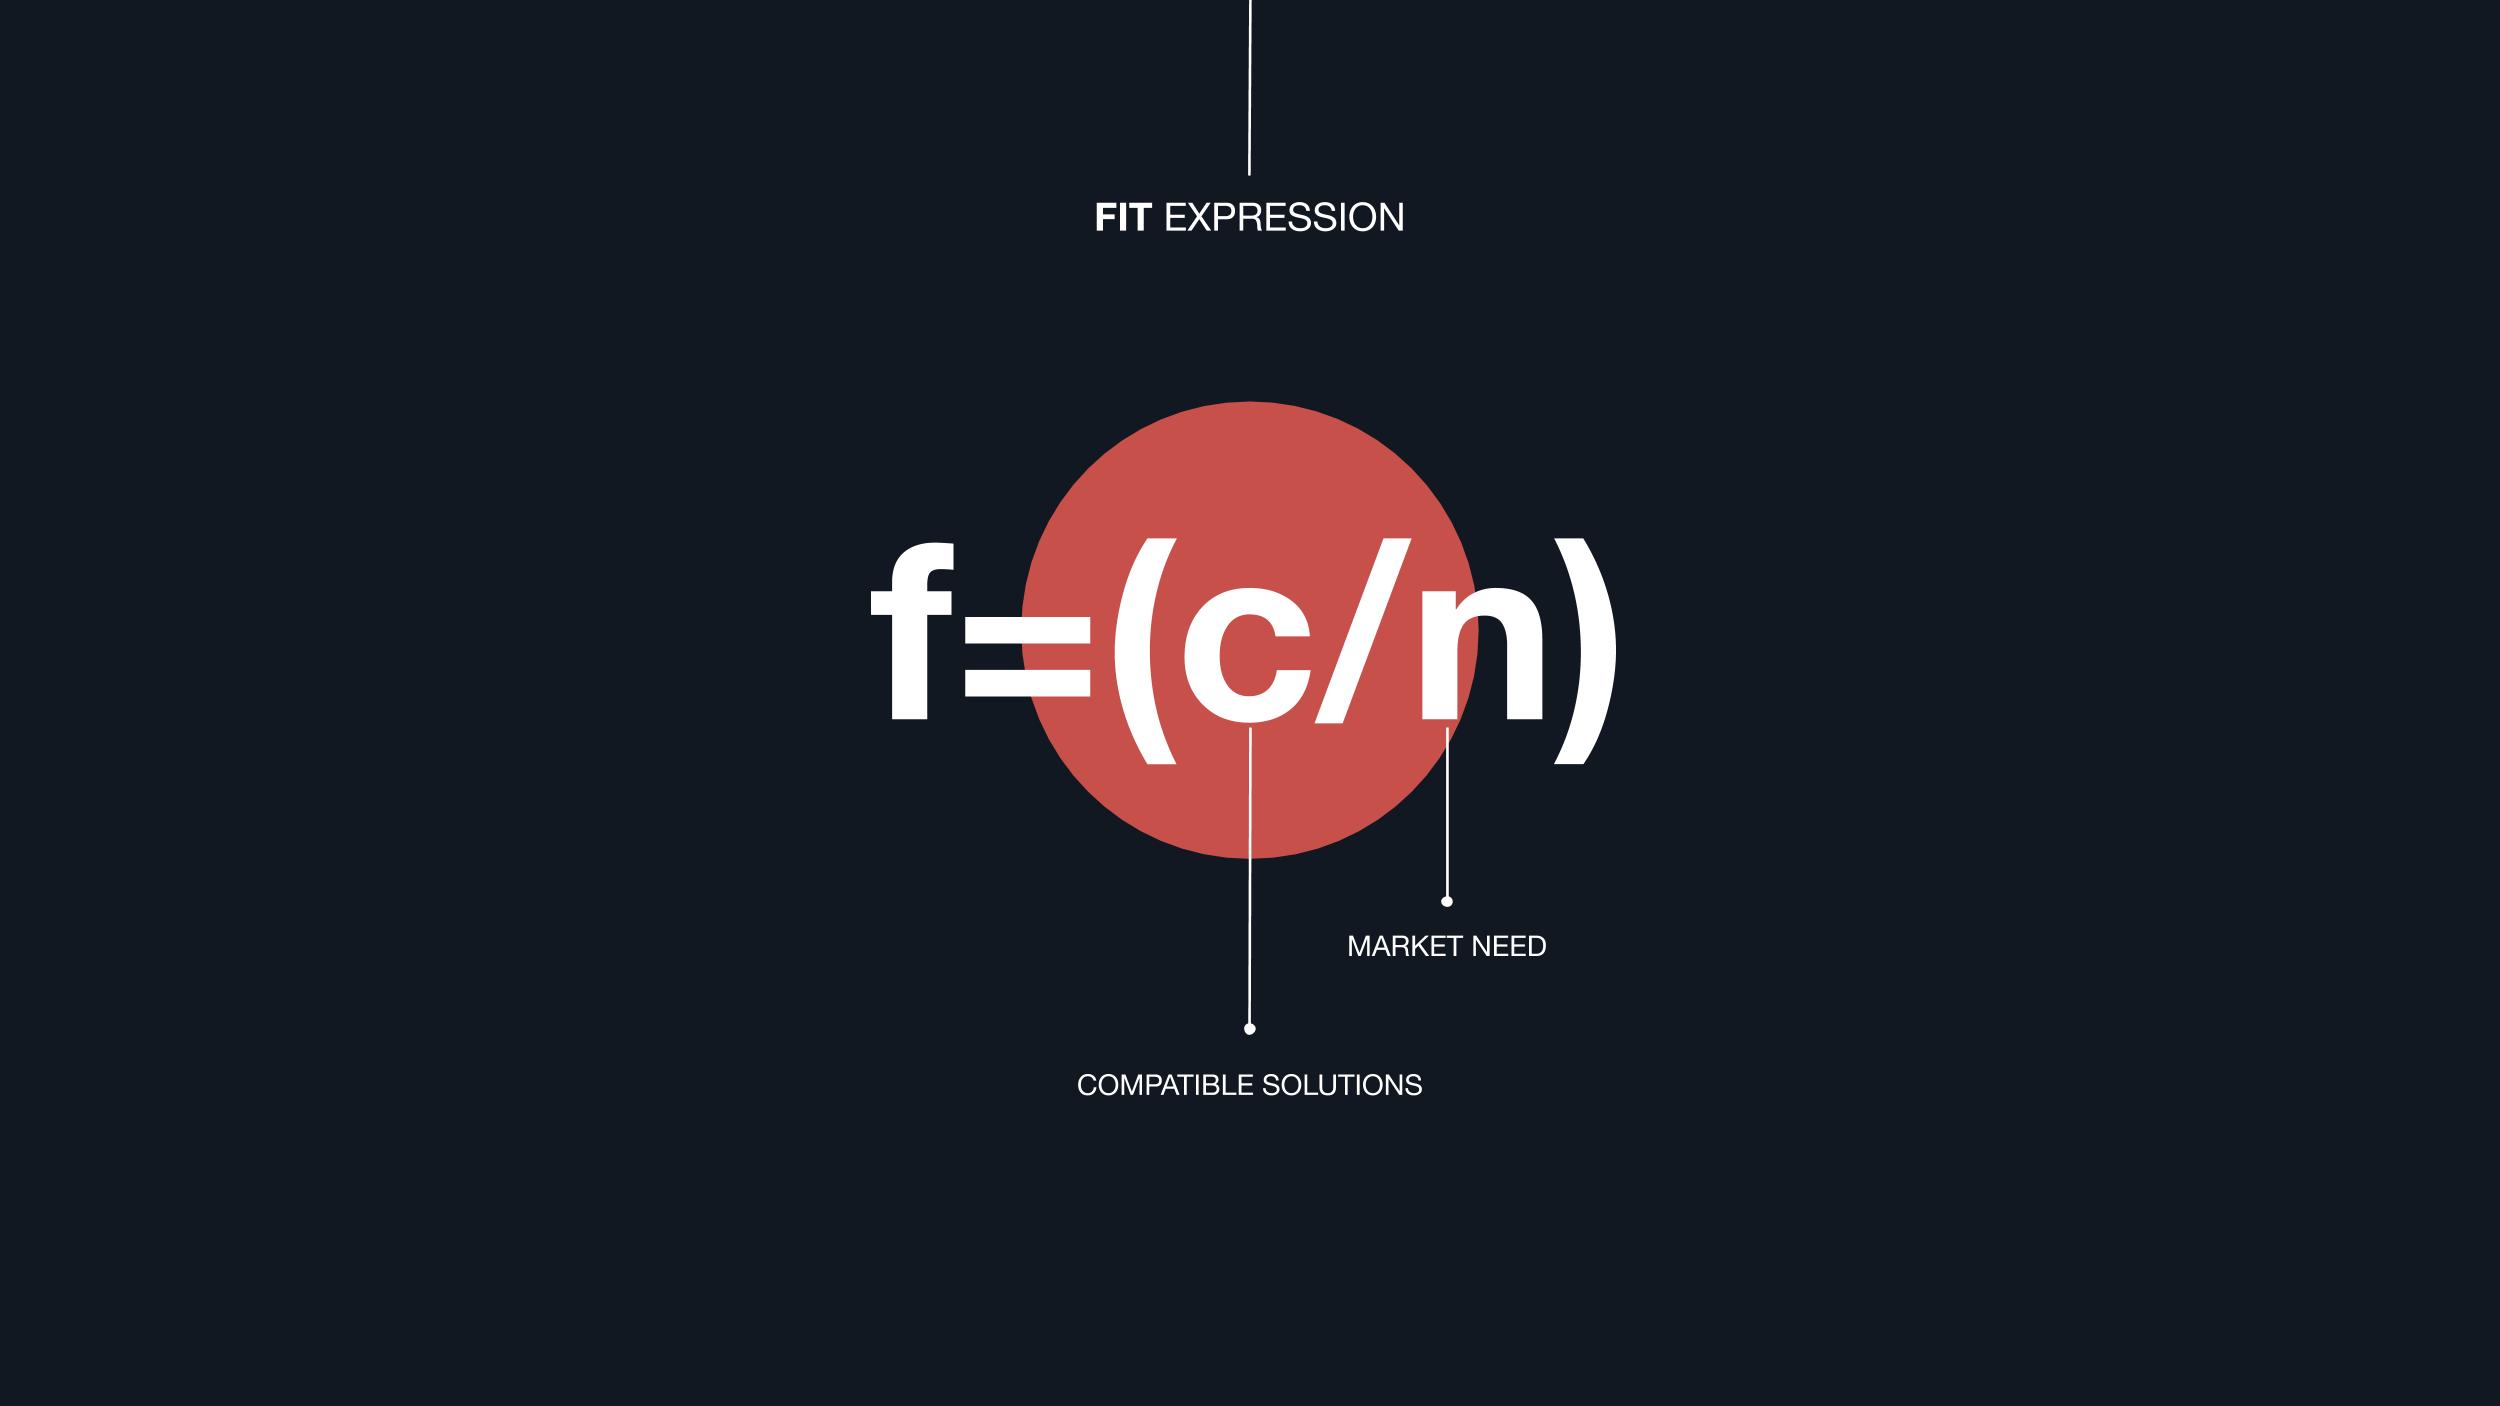 Growth Marketing: Fit Expression